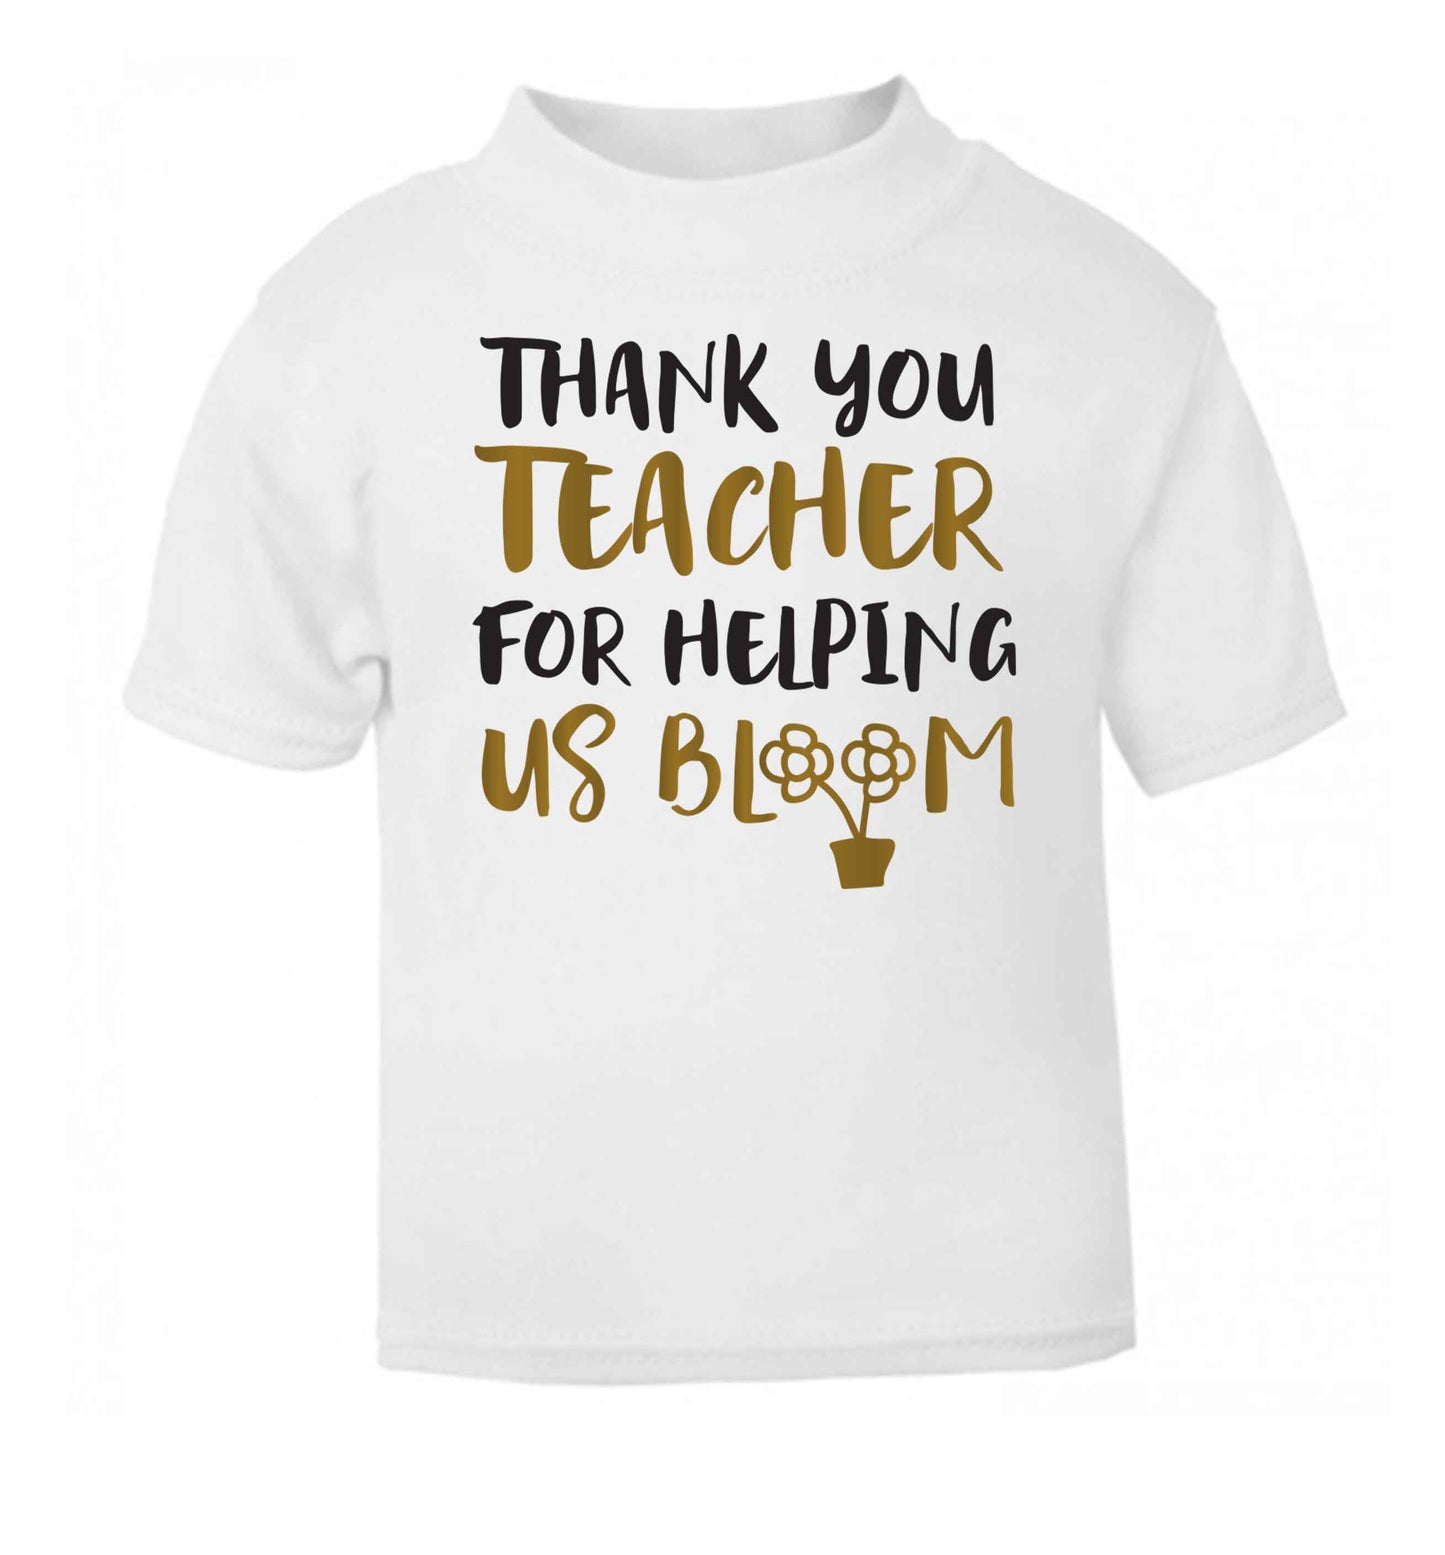 Thank you teacher for helping us bloom white Baby Toddler Tshirt 2 Years